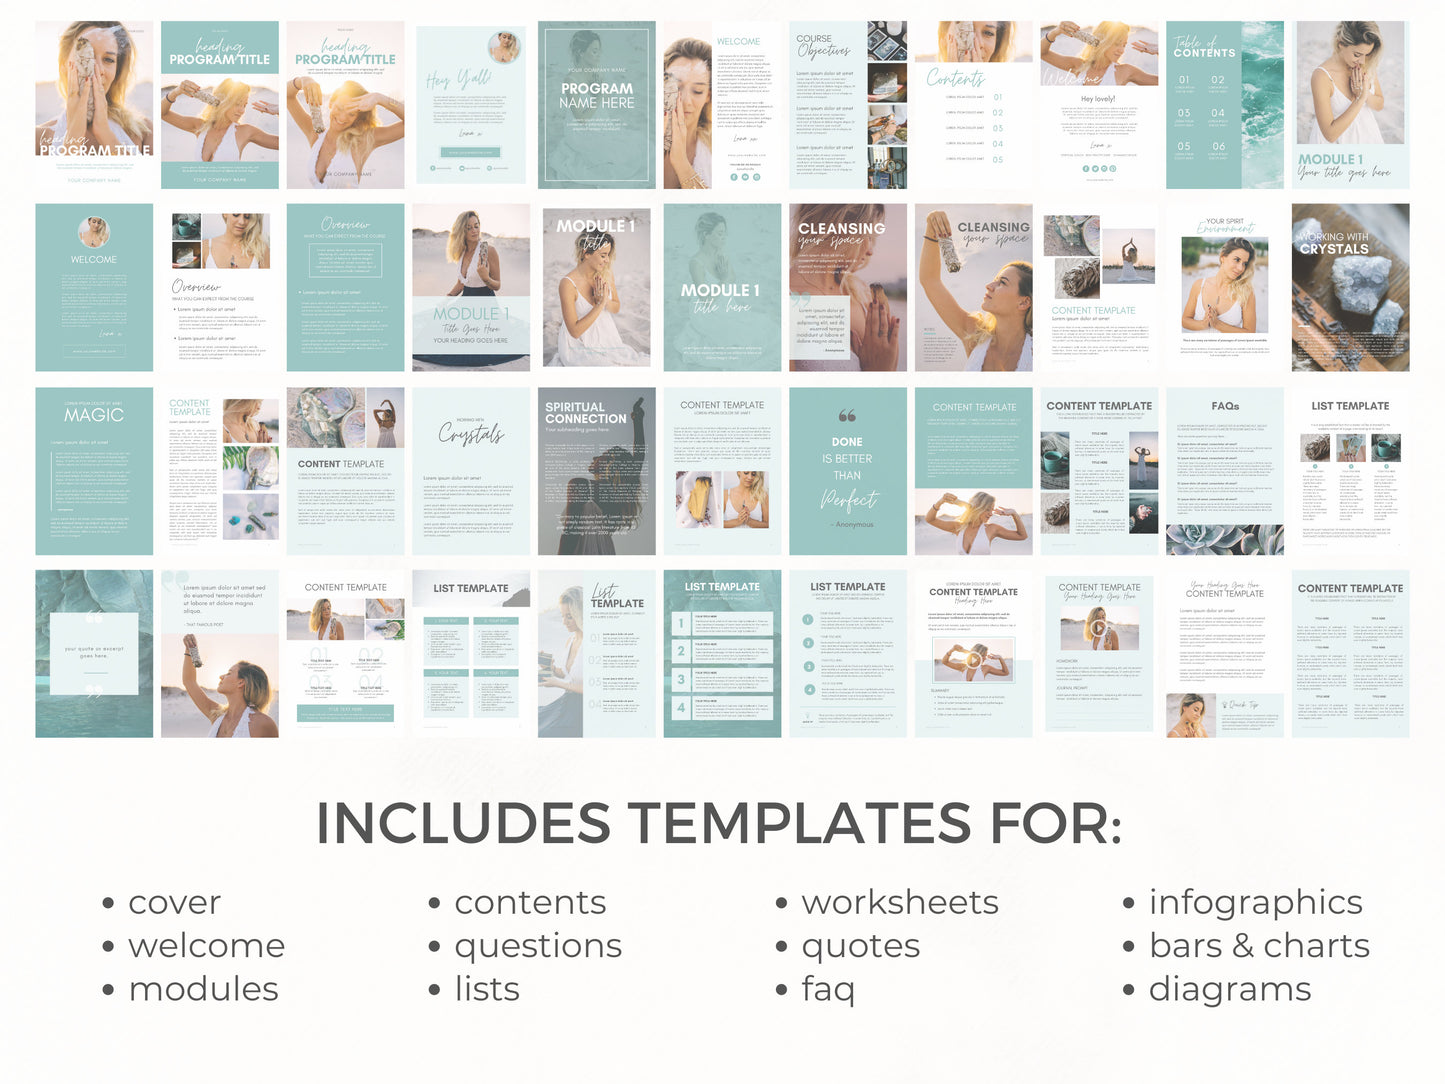 Teal Course eBook Template Canva for Content Creator | Life Coach Business Wellness Holistic Spiritual Canva template | ebook PDF workbook